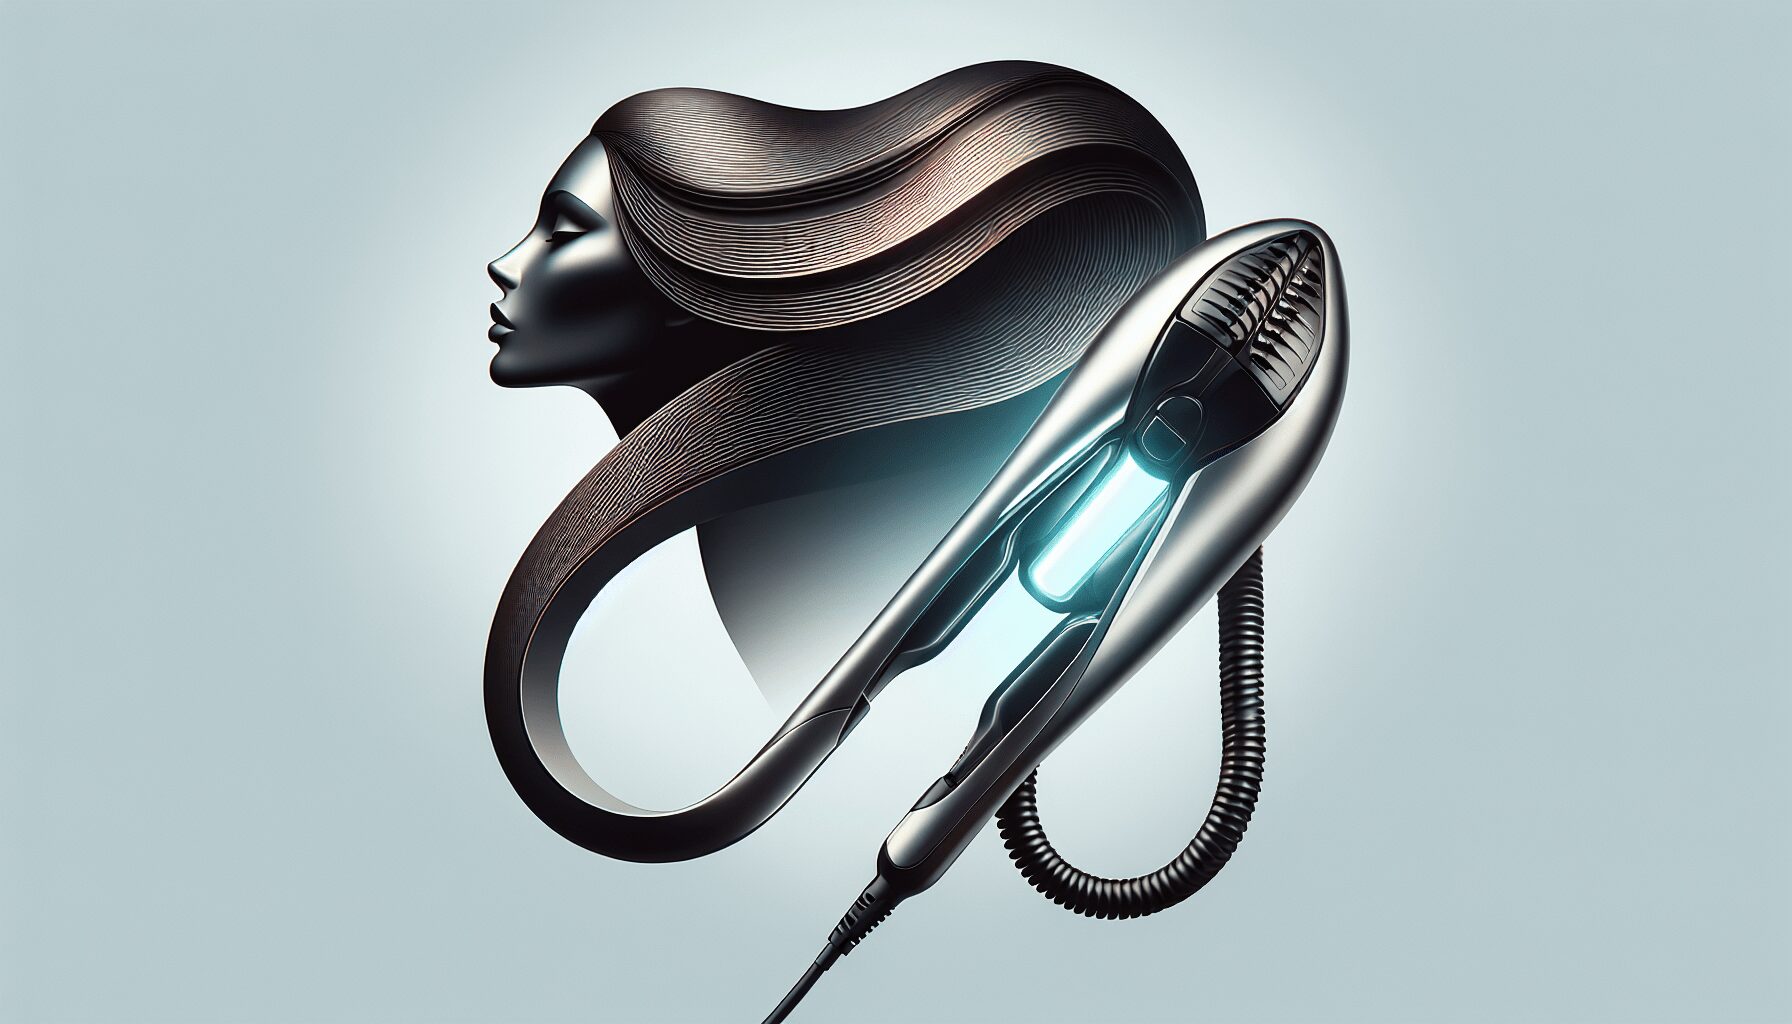 Does The Dyson Airwrap Replace A Curling Iron?